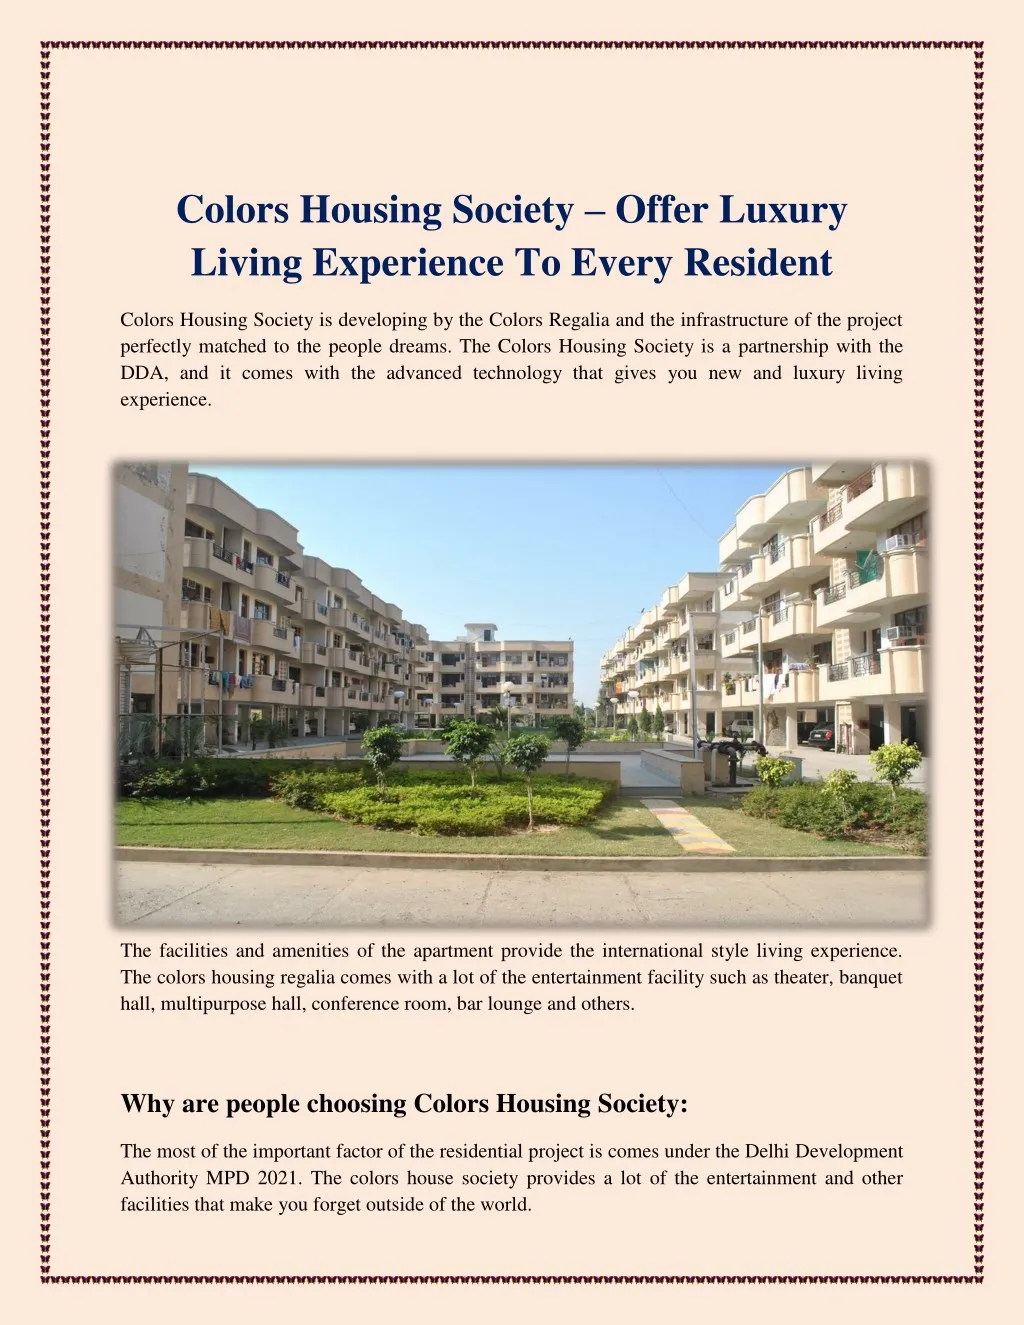 colors housing society offer luxury living